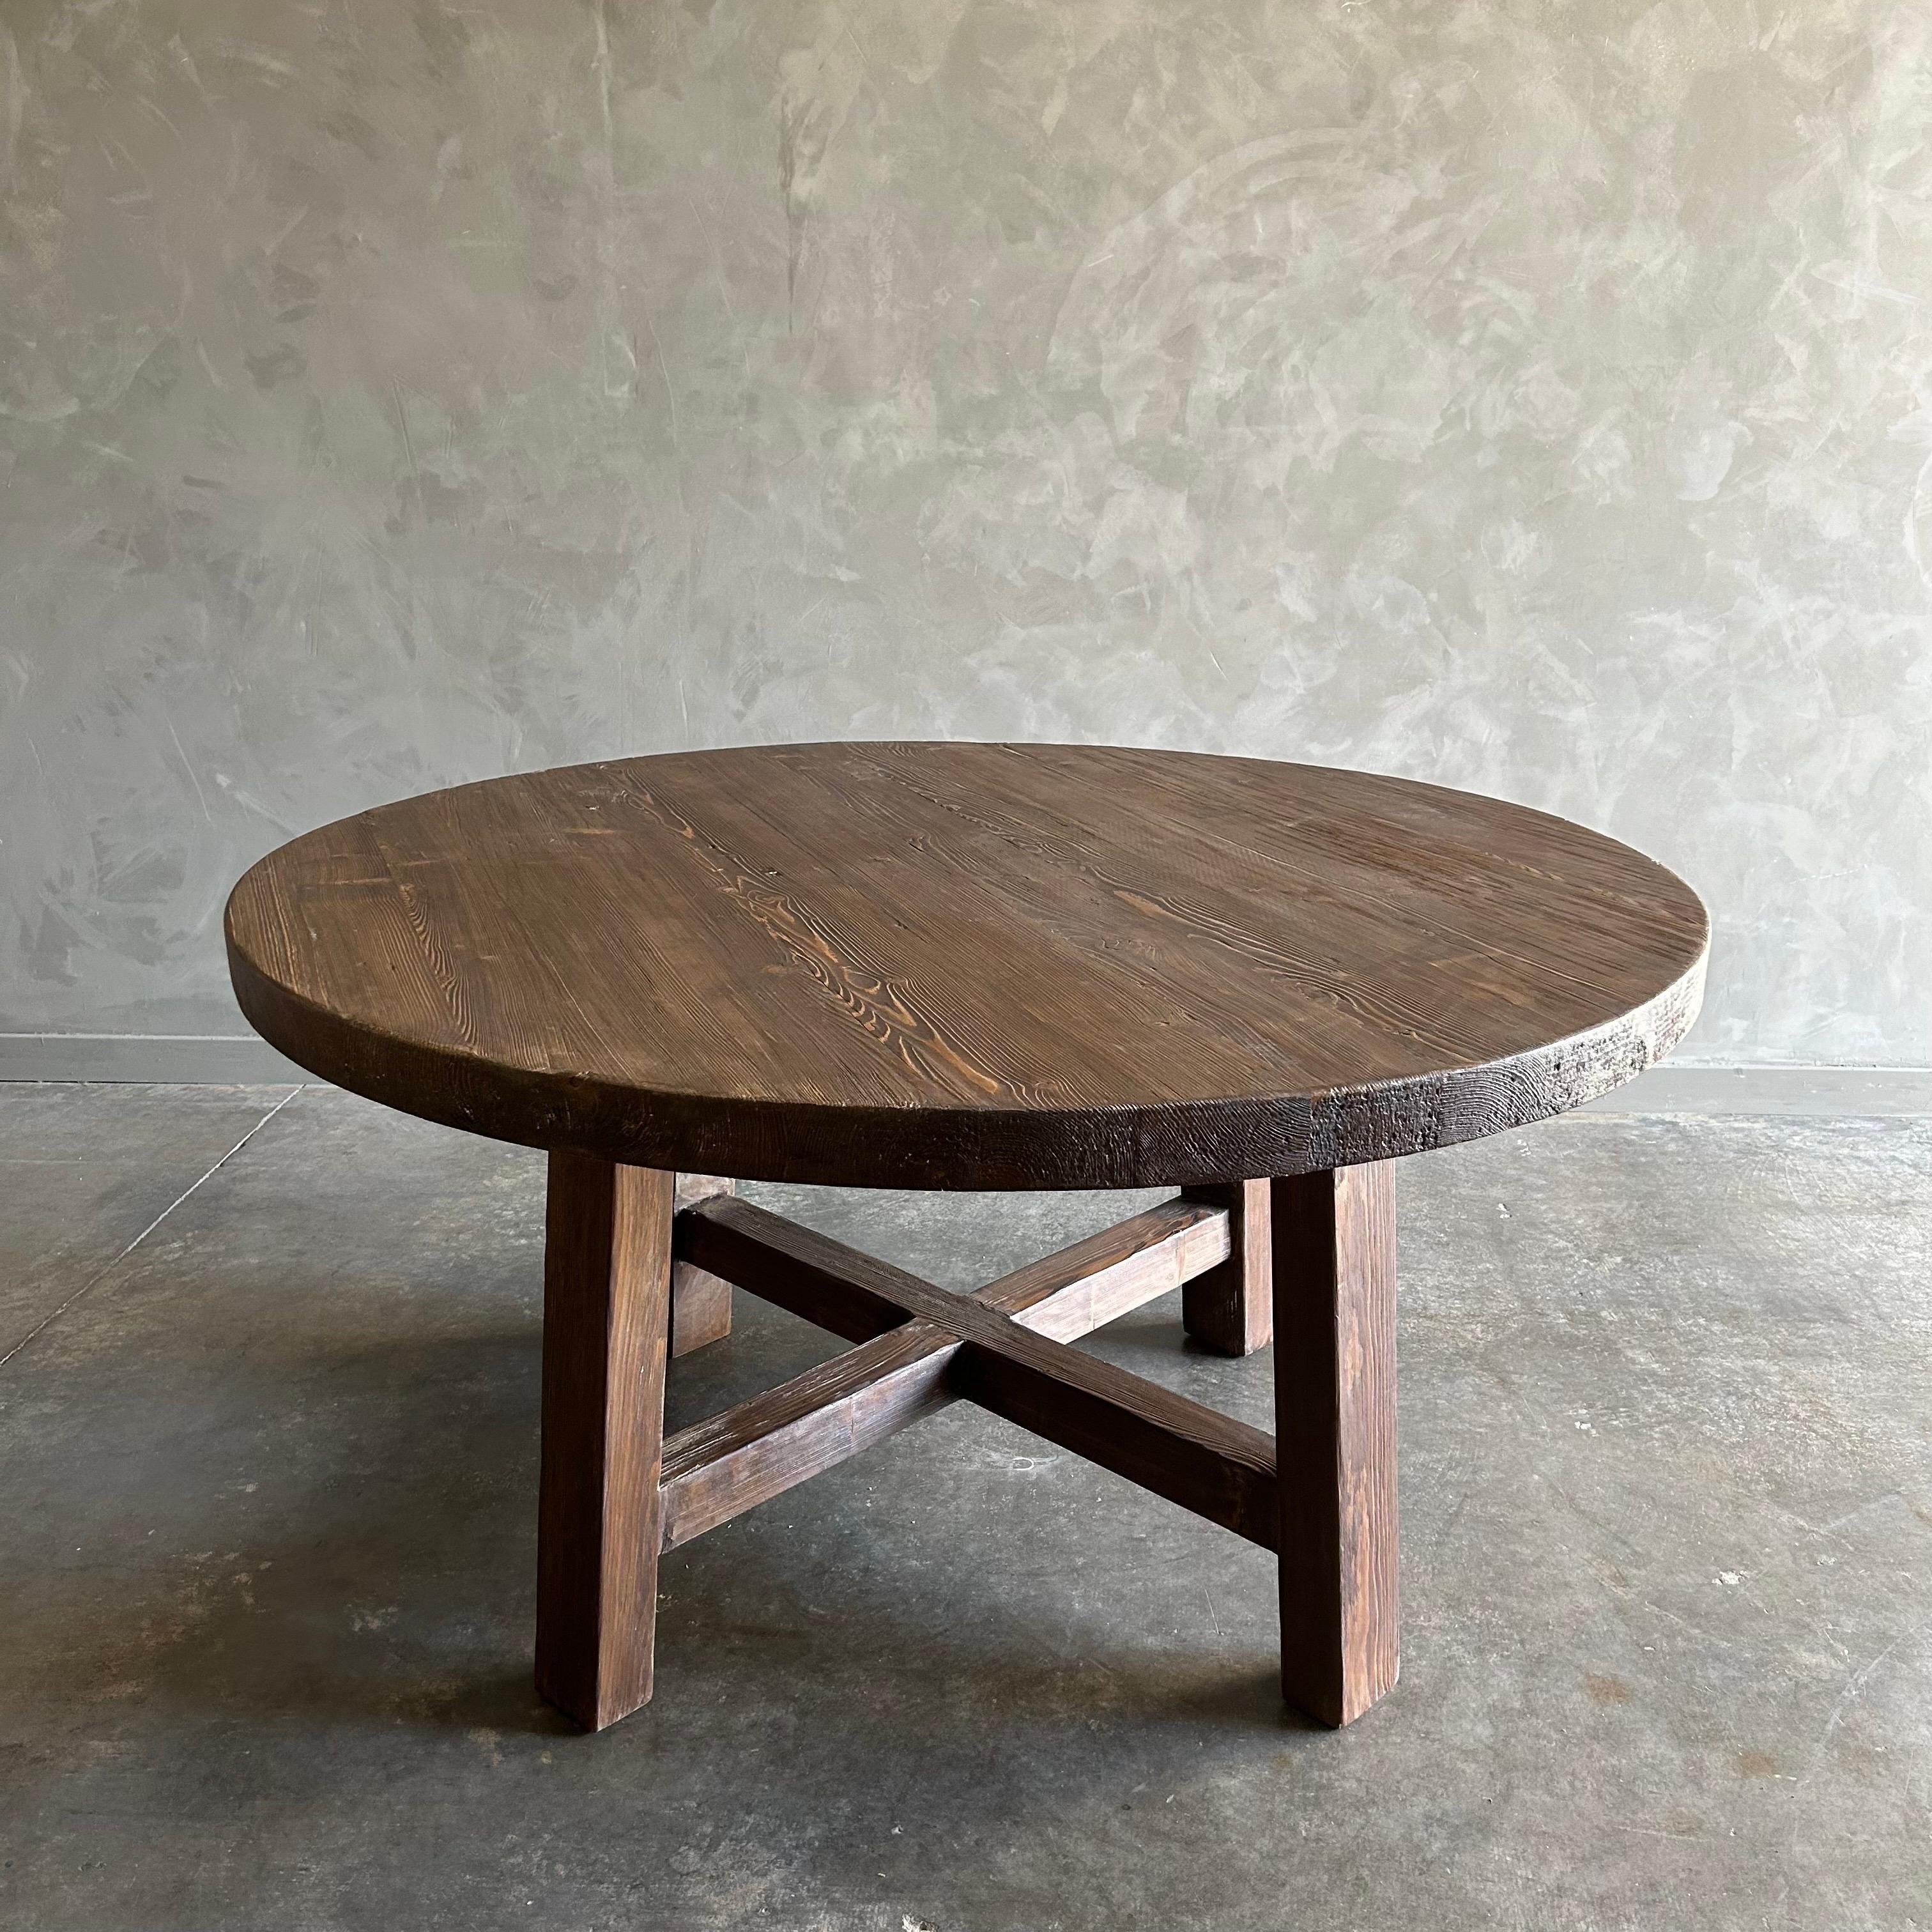 BH COLLECTION: Hana Dining Table
These old elm timbers show in its most primal, natural form. The artisanal construction methods highlight the elm woods beautiful grain pattern & knots and fissures from its past life. The most authentic materials